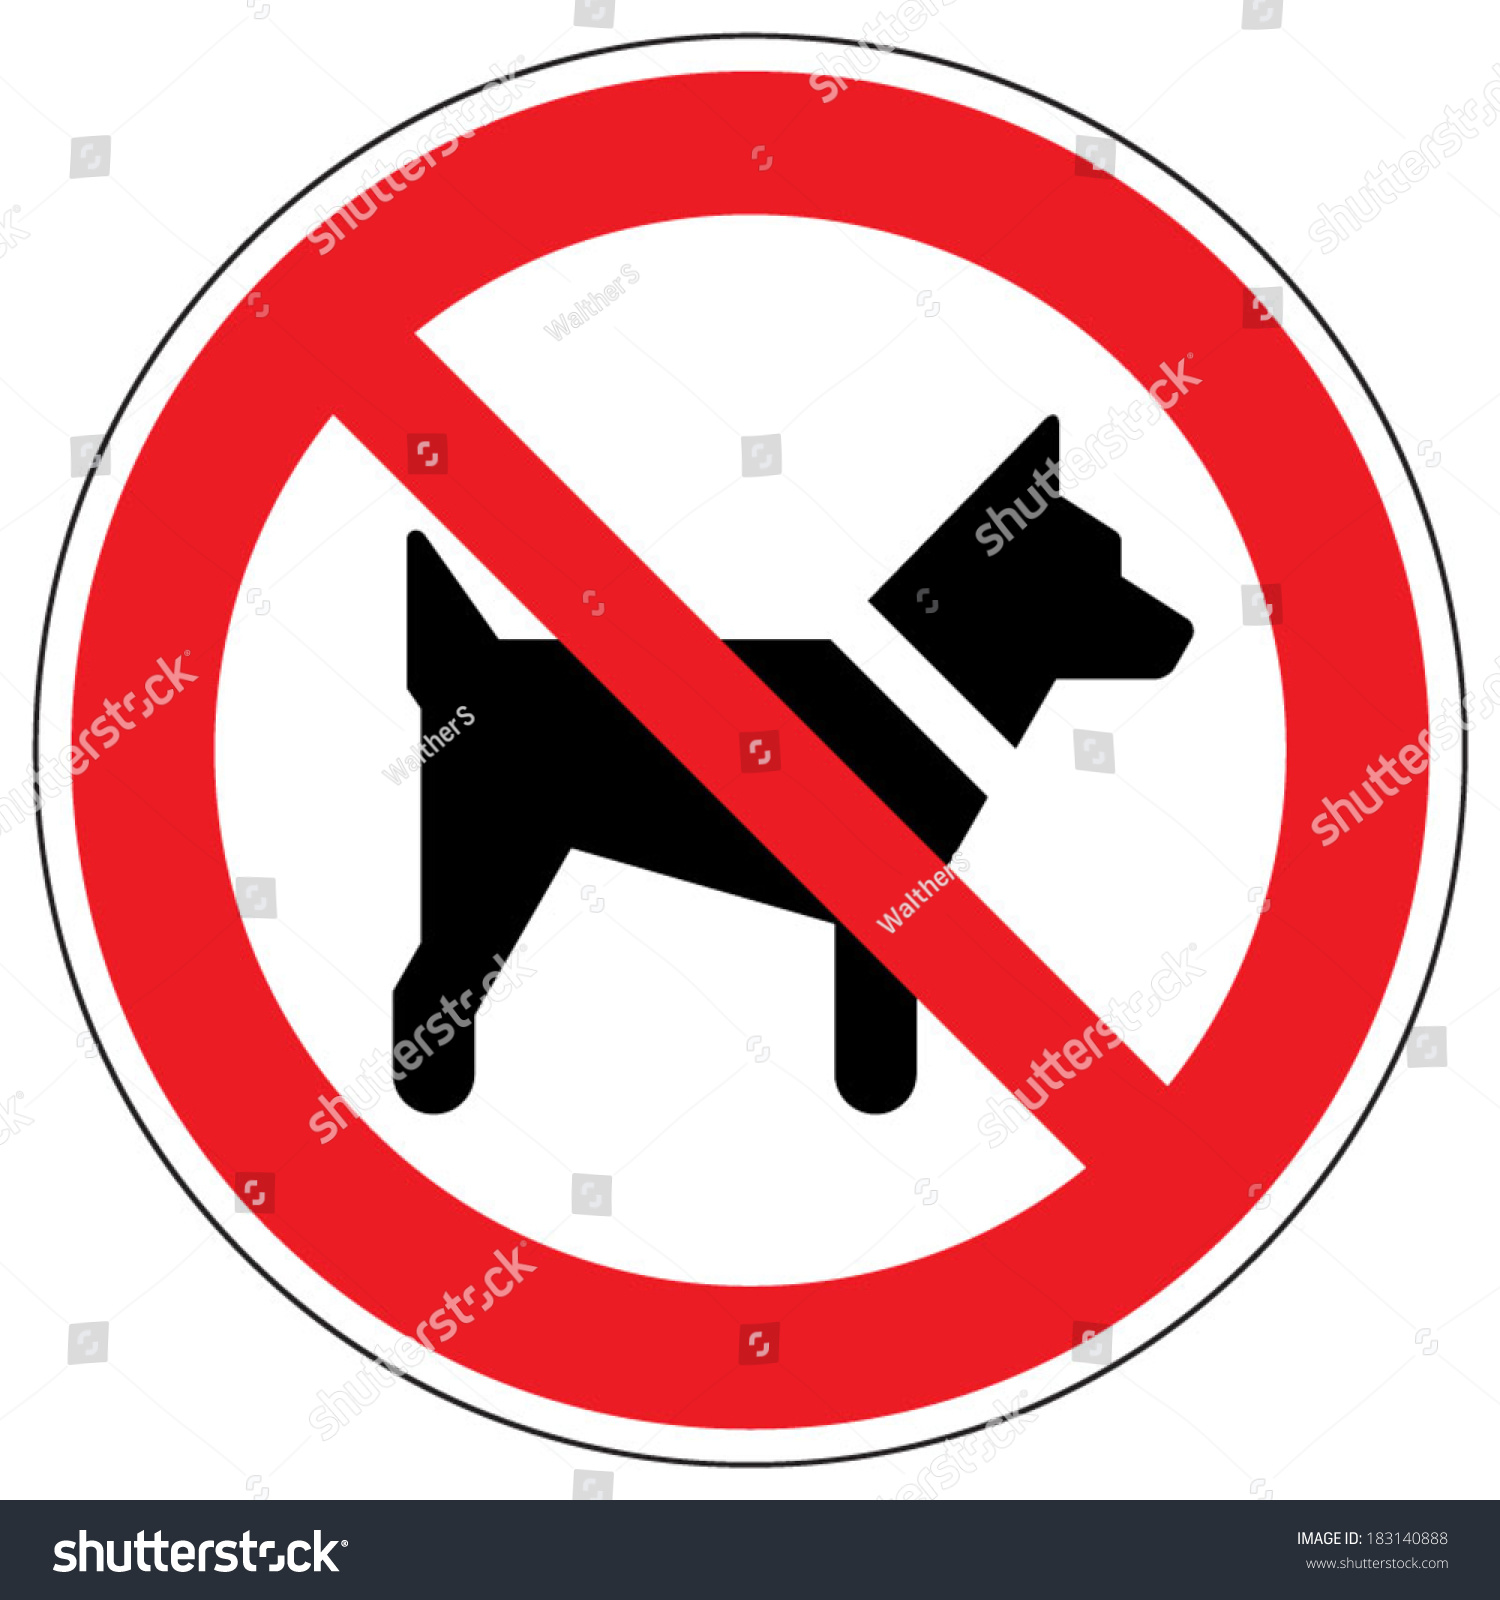 No Dogs Sign Stock Vector 183140888 : Shutterstock